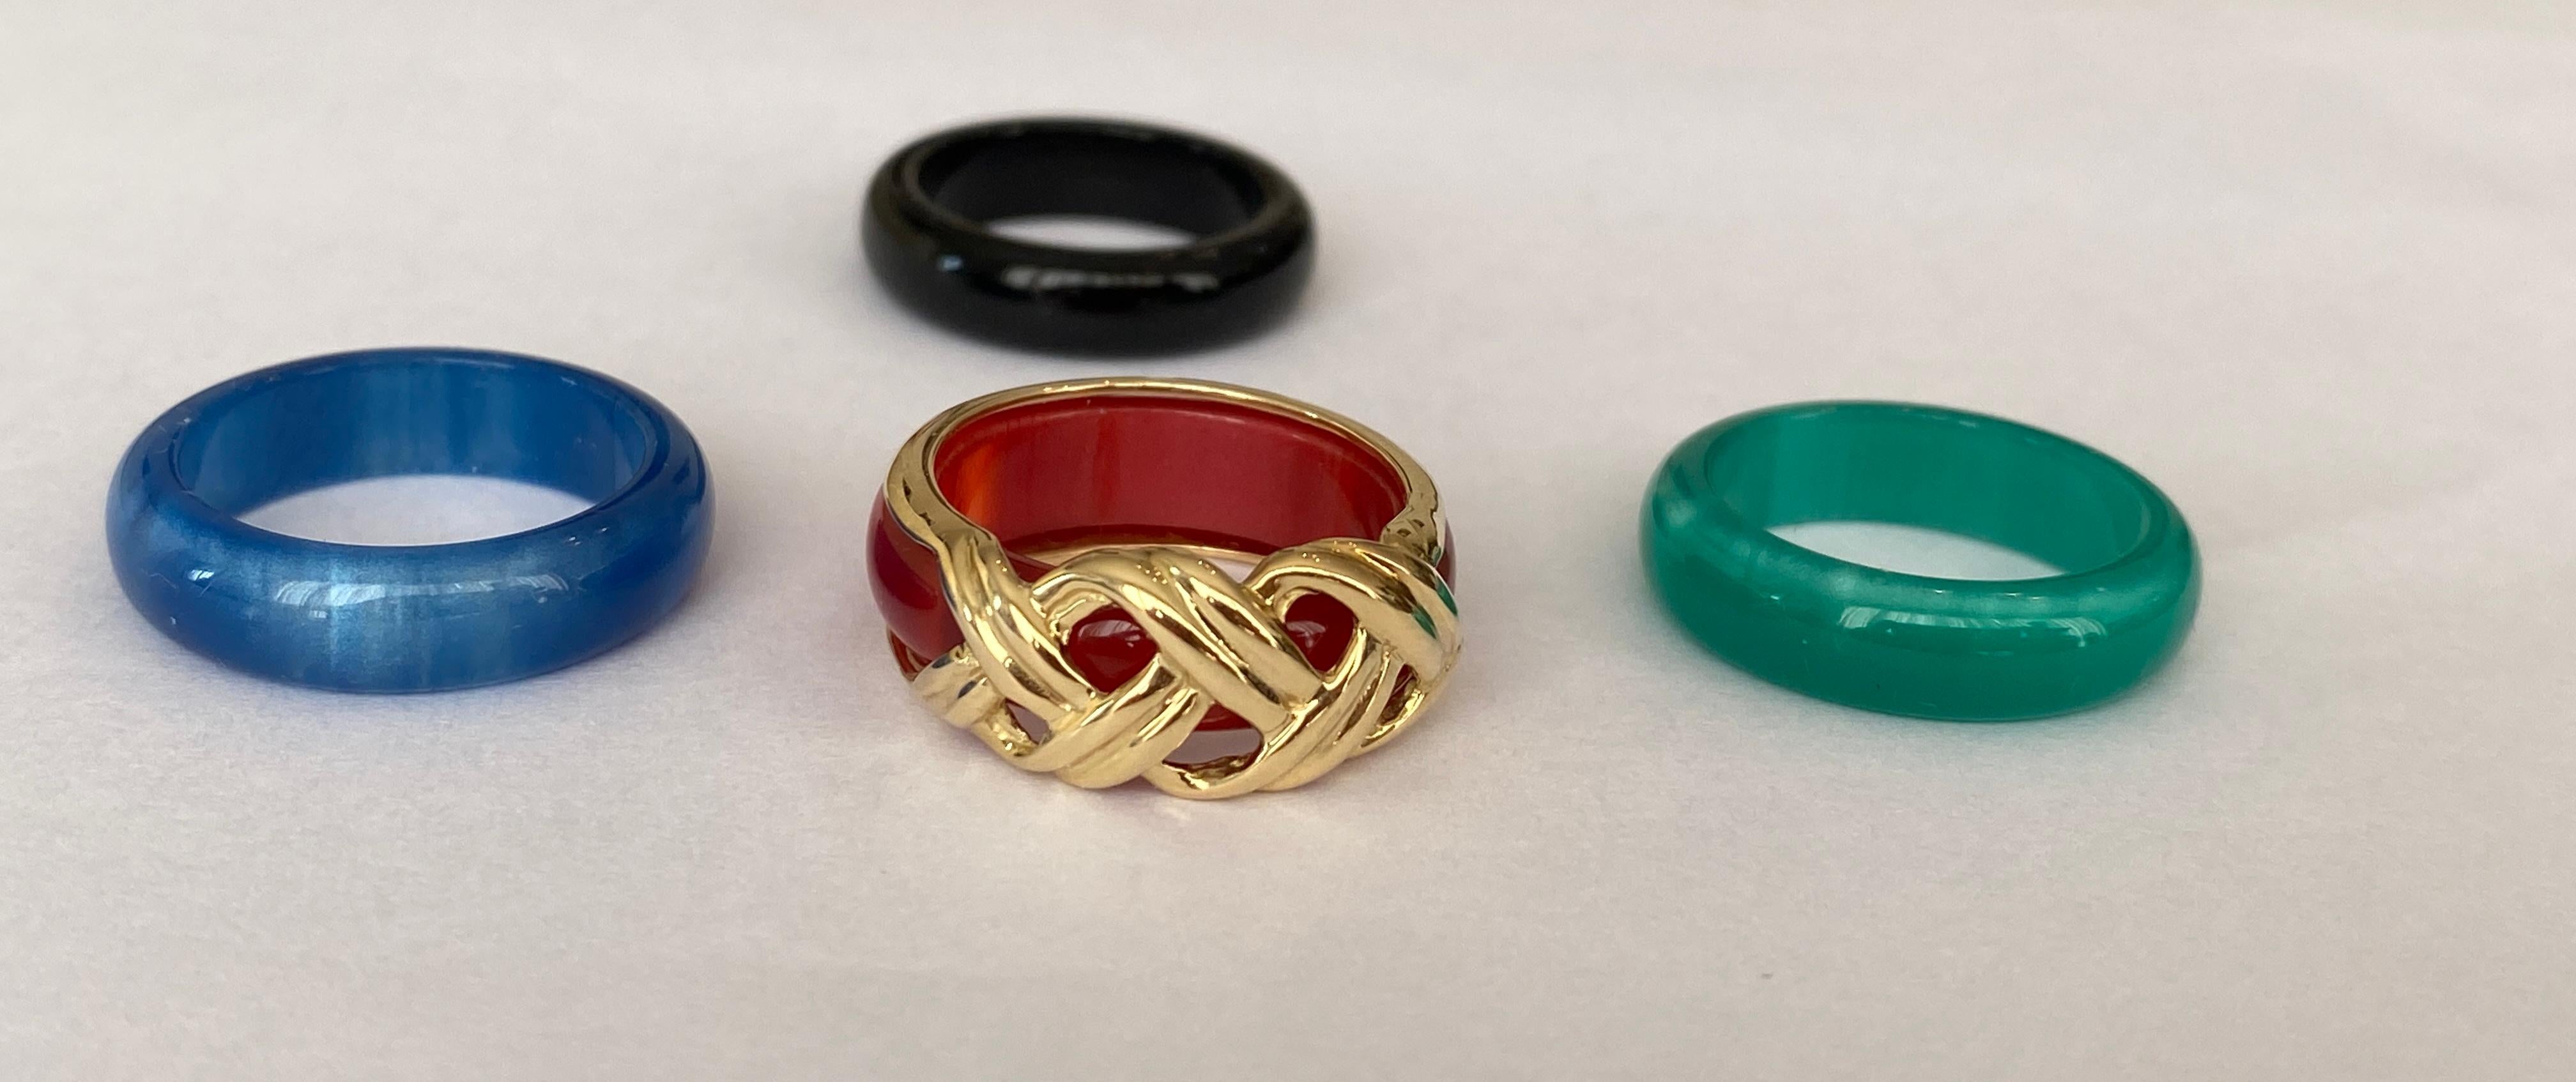 This is an extremely rare vintage ring set from renowned French jeweler and author of 